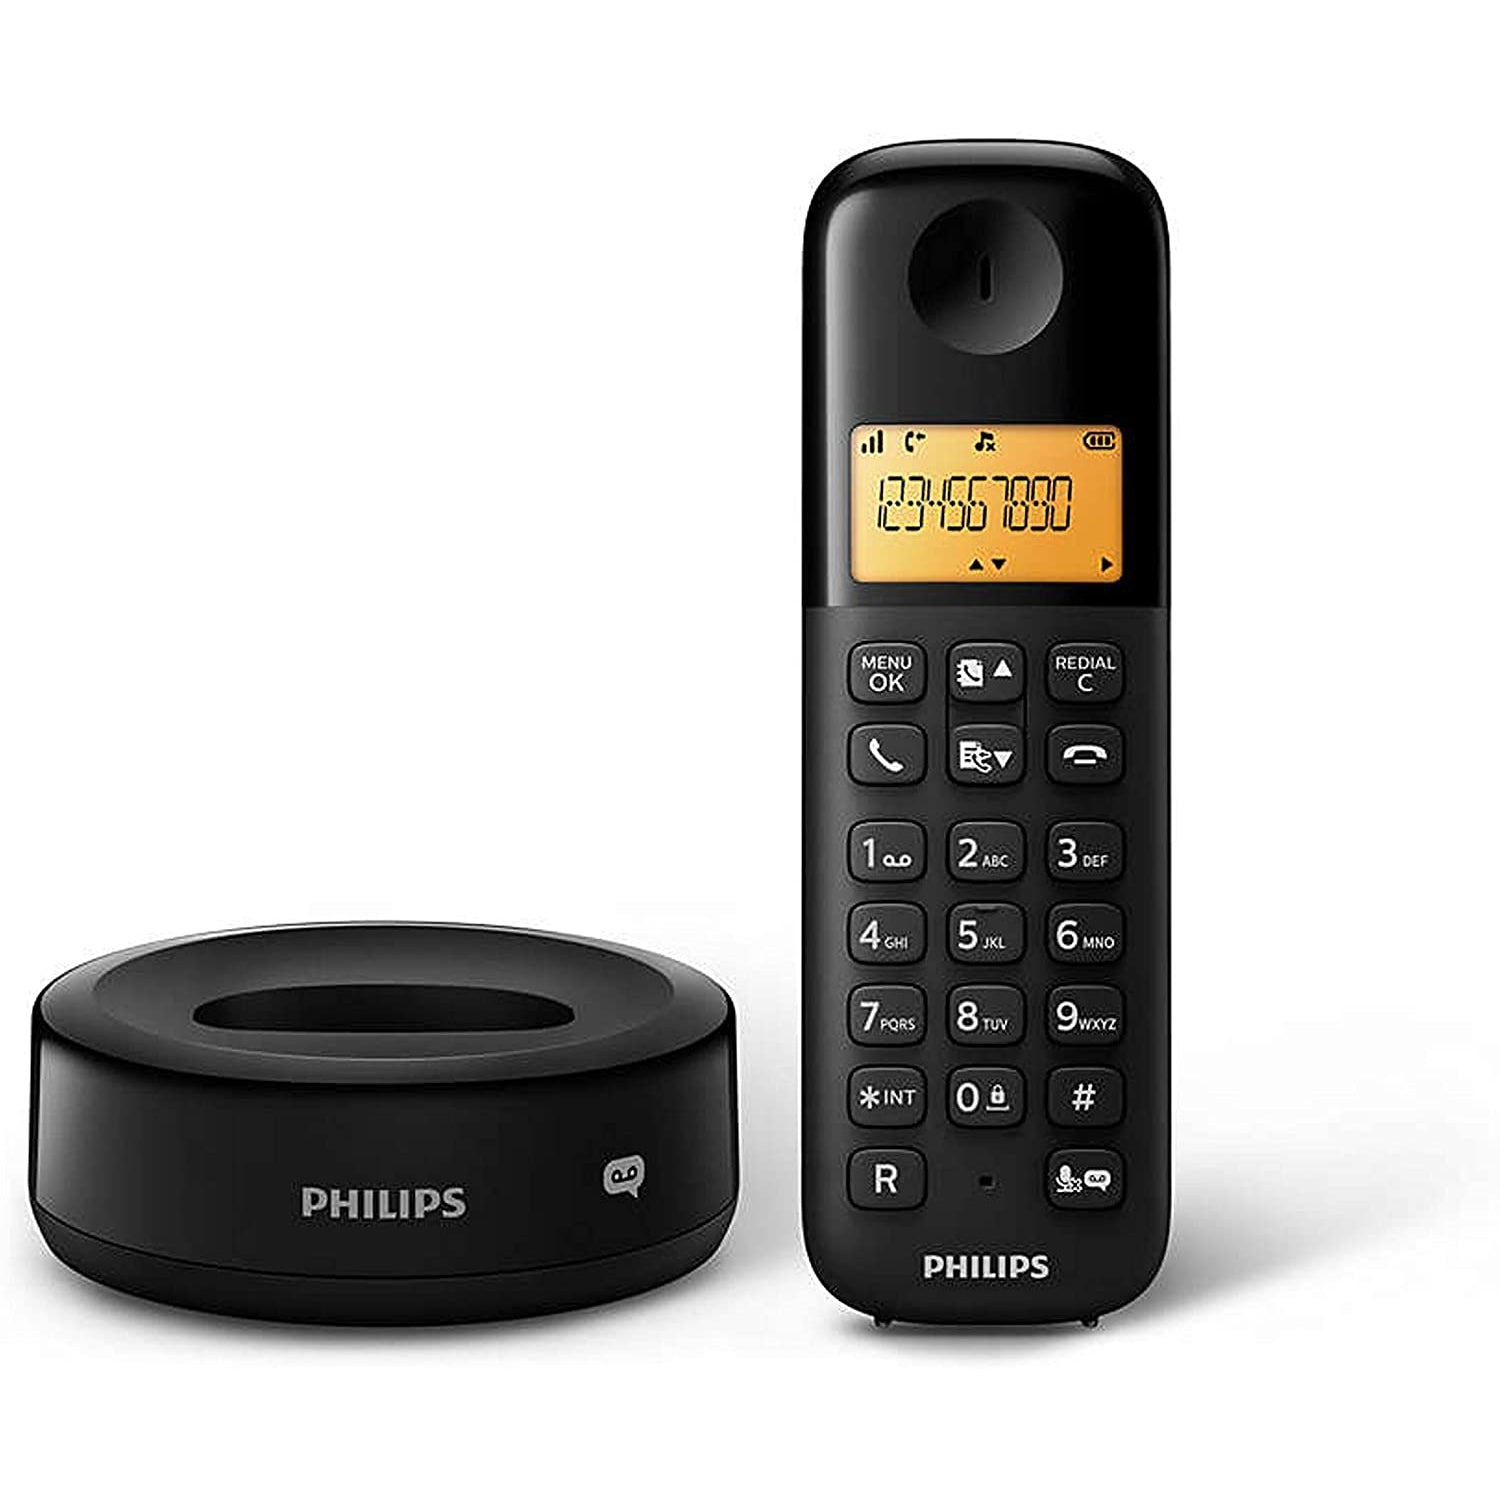 Philips D1652B Cordless DECT Landline Phone, Home Telephone with Answering Machine, Two Handsets - Black